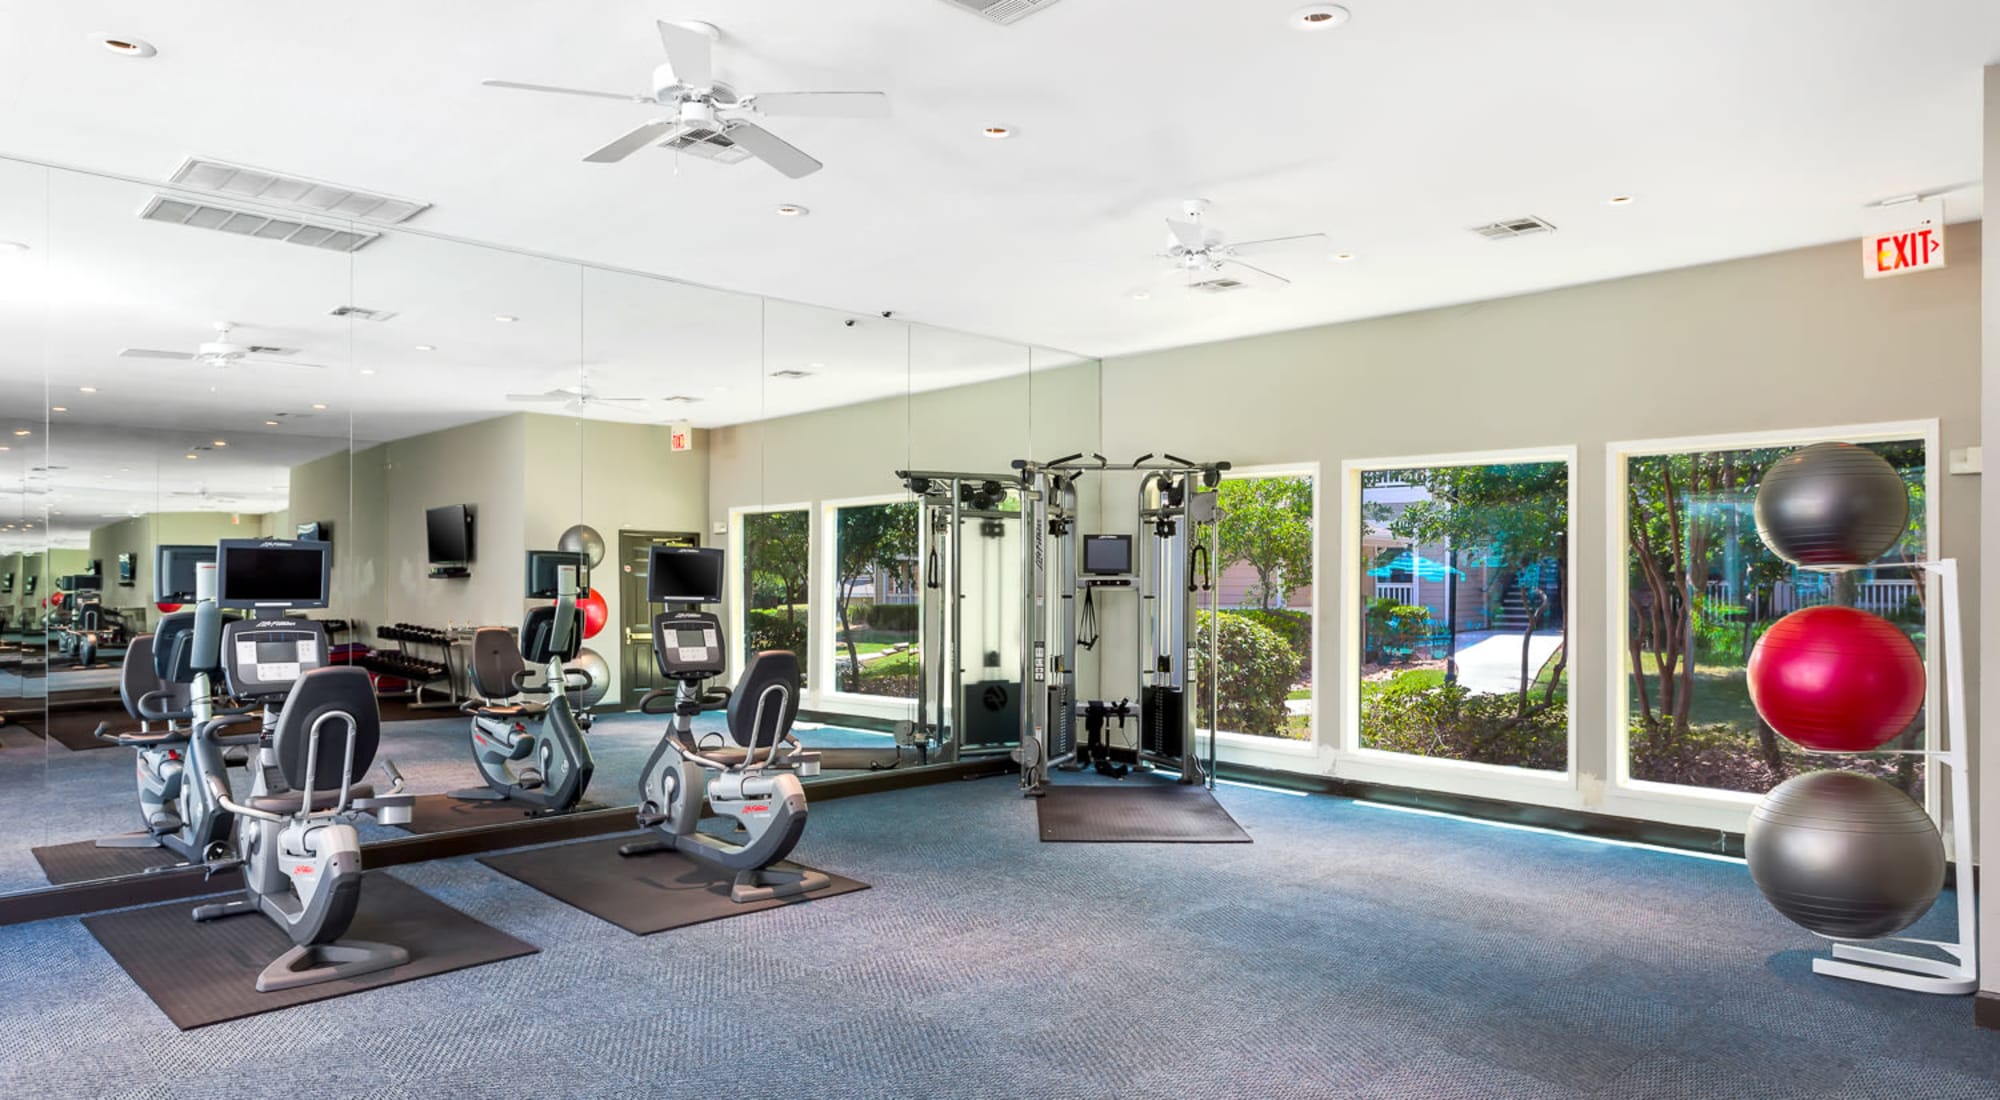 Fitness Center overlooking swimming pool at The Lodge at Shavano Park